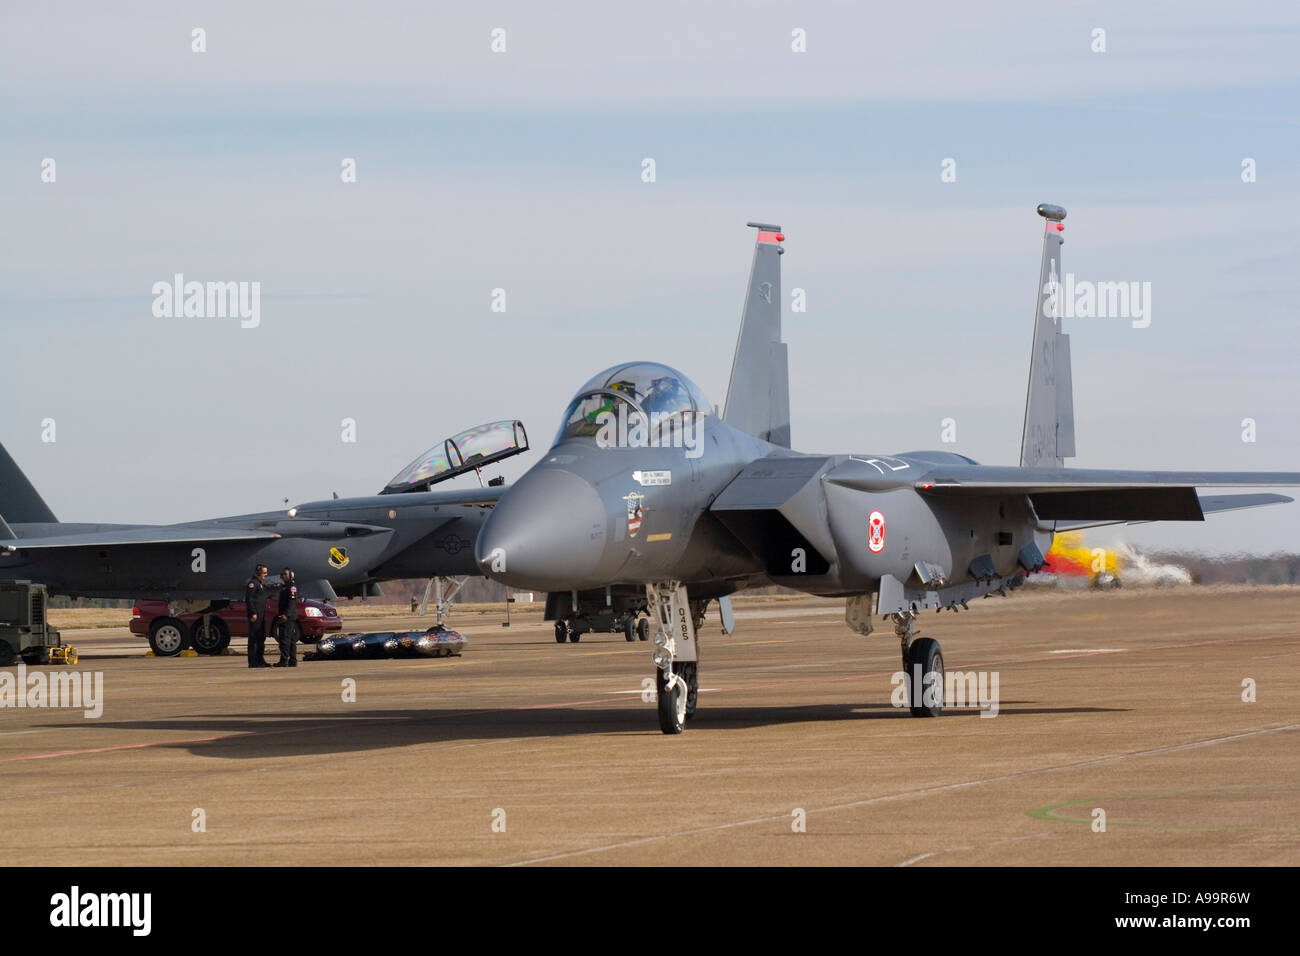 F-15 Strike Eagle air to ground attack aircraft Stock Photo